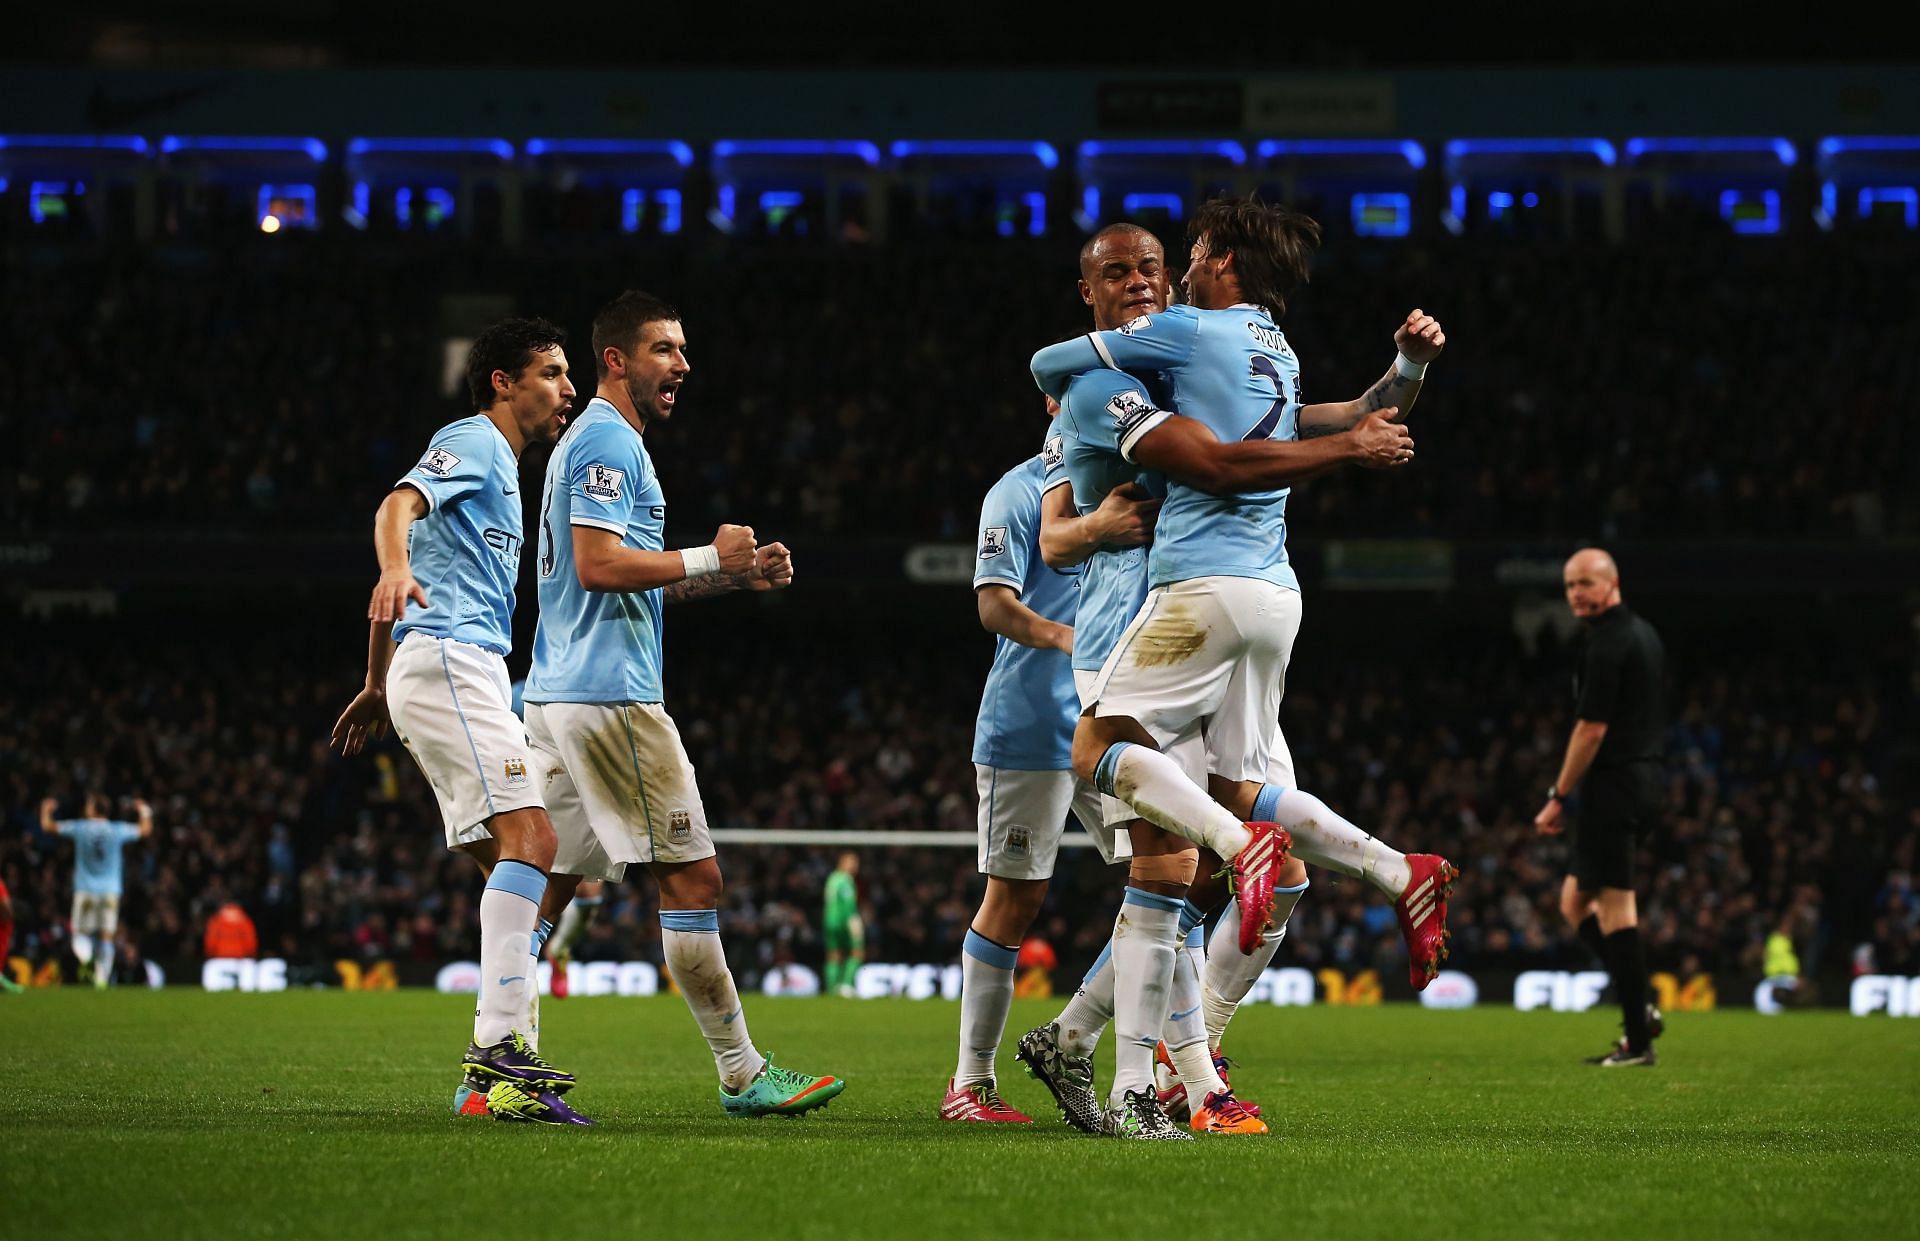 Manchester City managed 102 goals in the 2013-14 EPL